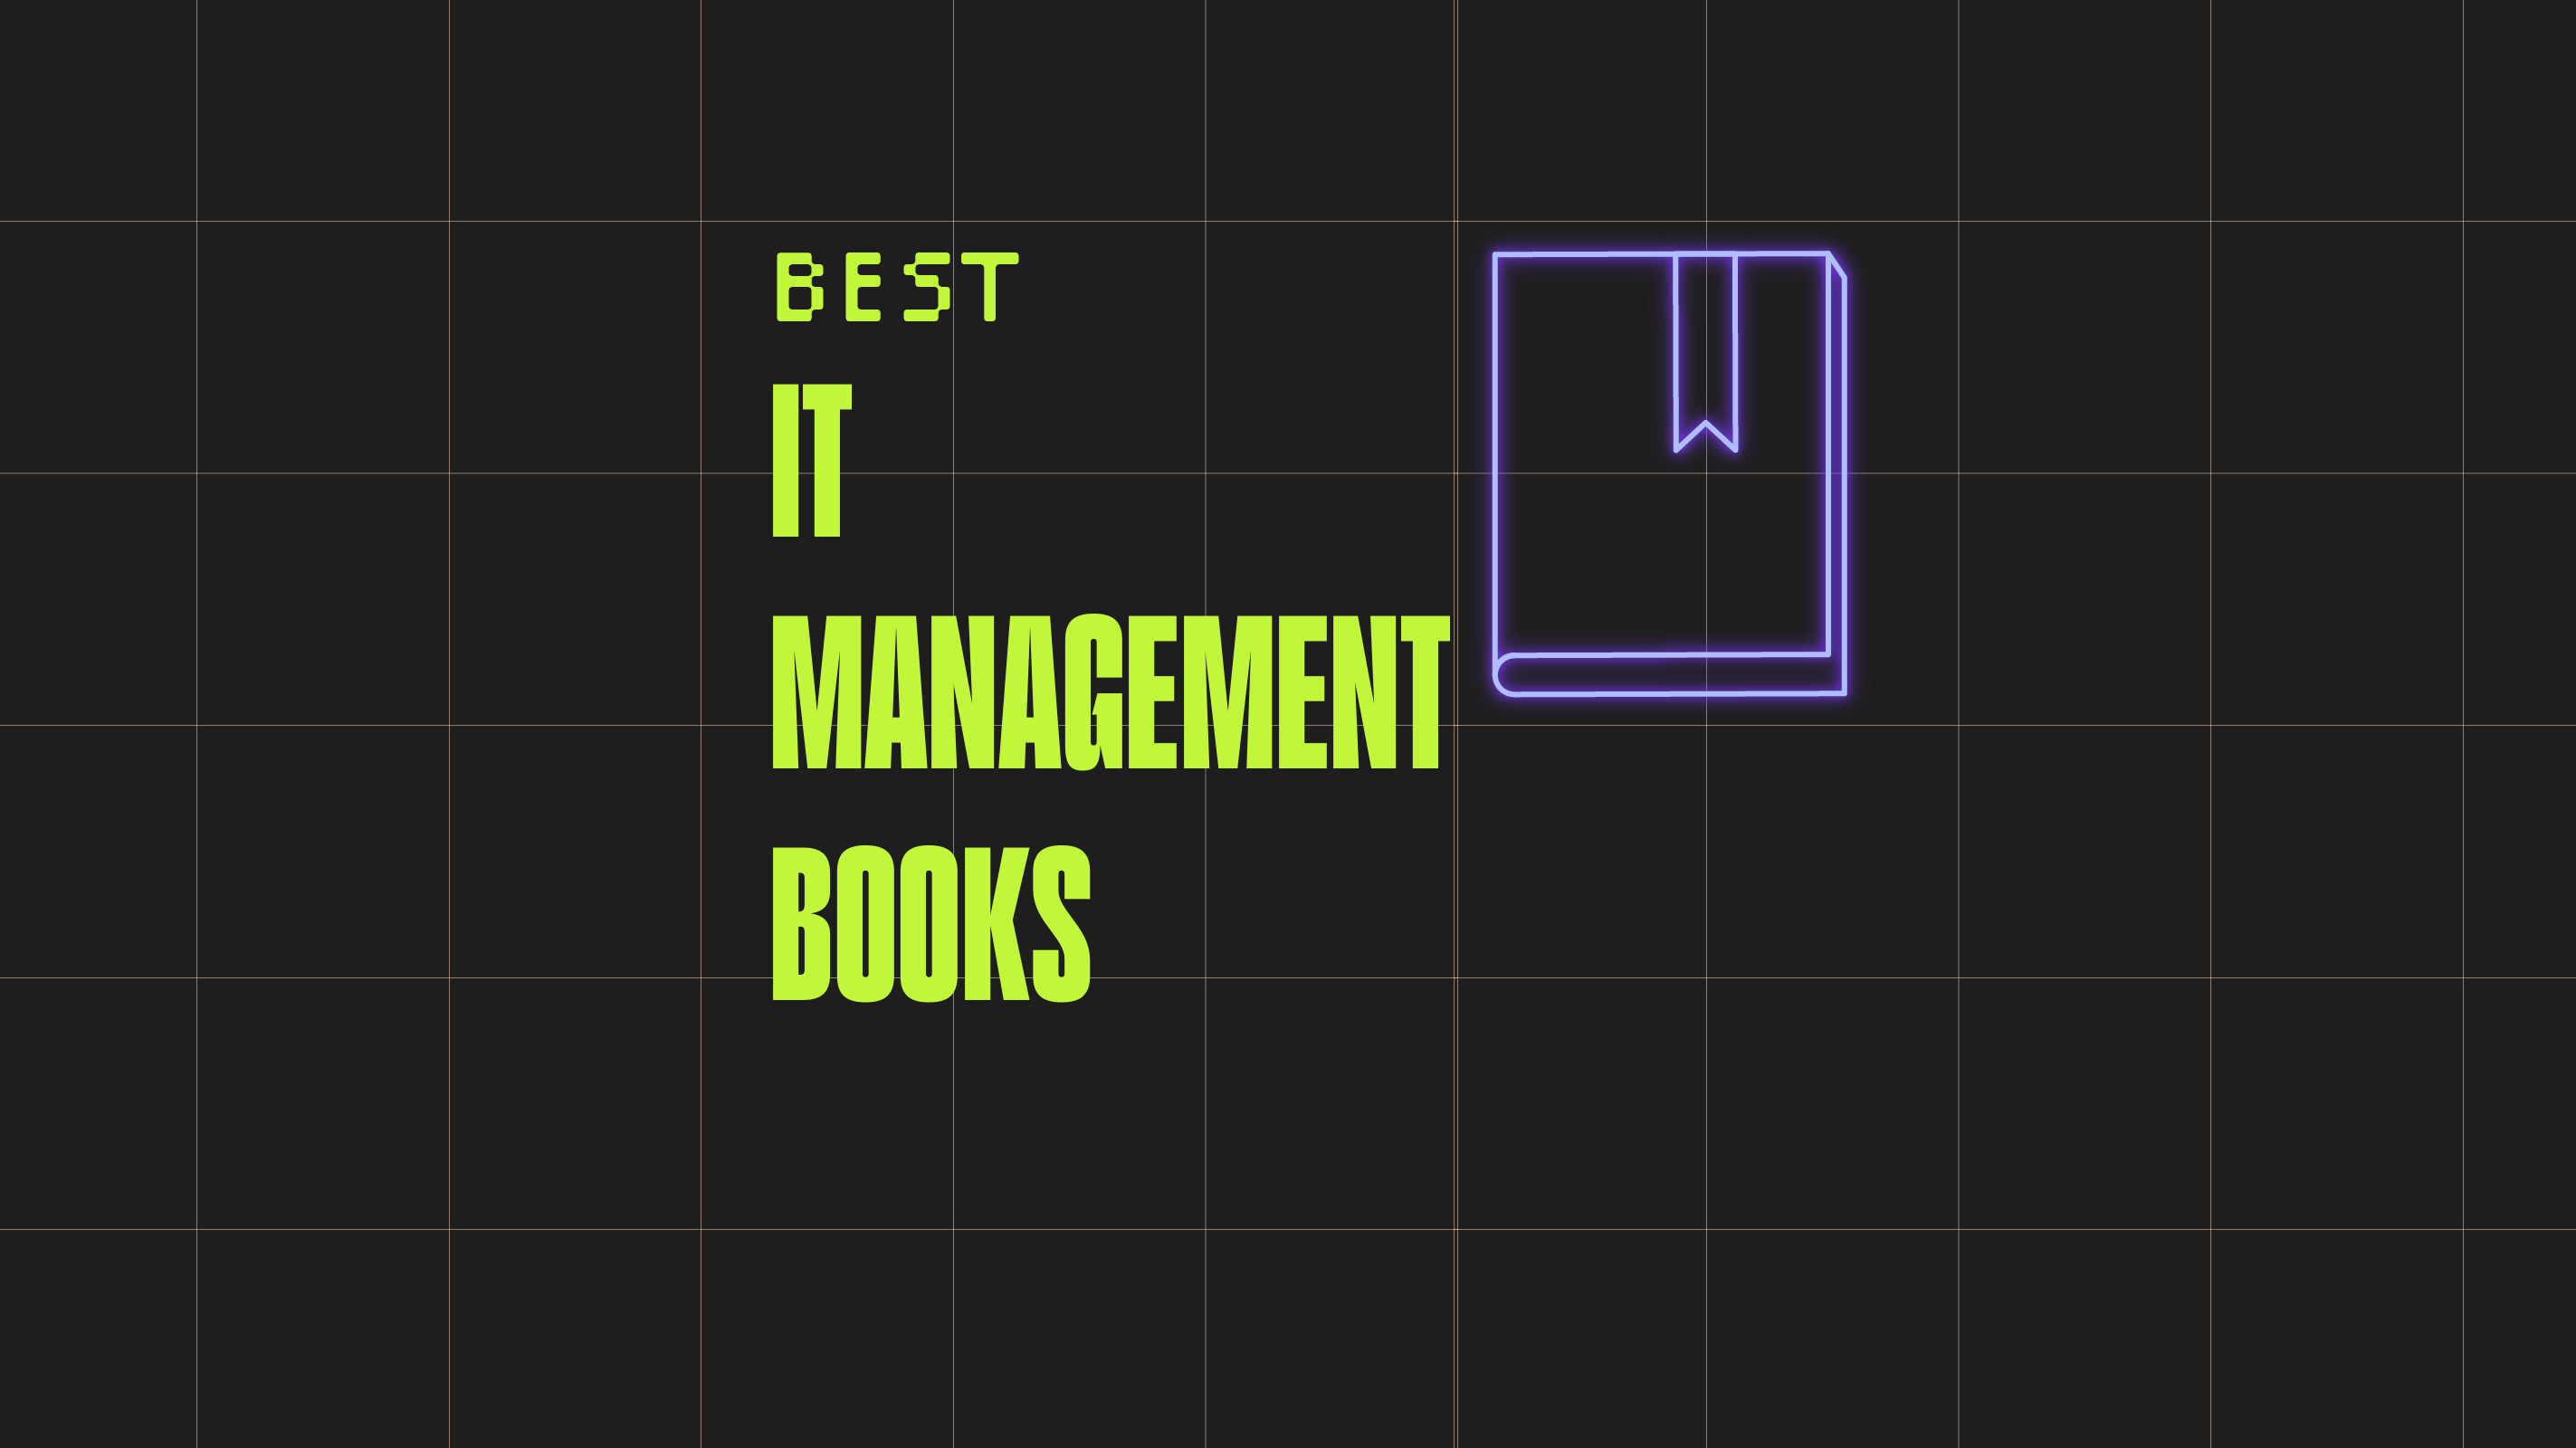 CTO-it-management-books-featured-image-6517